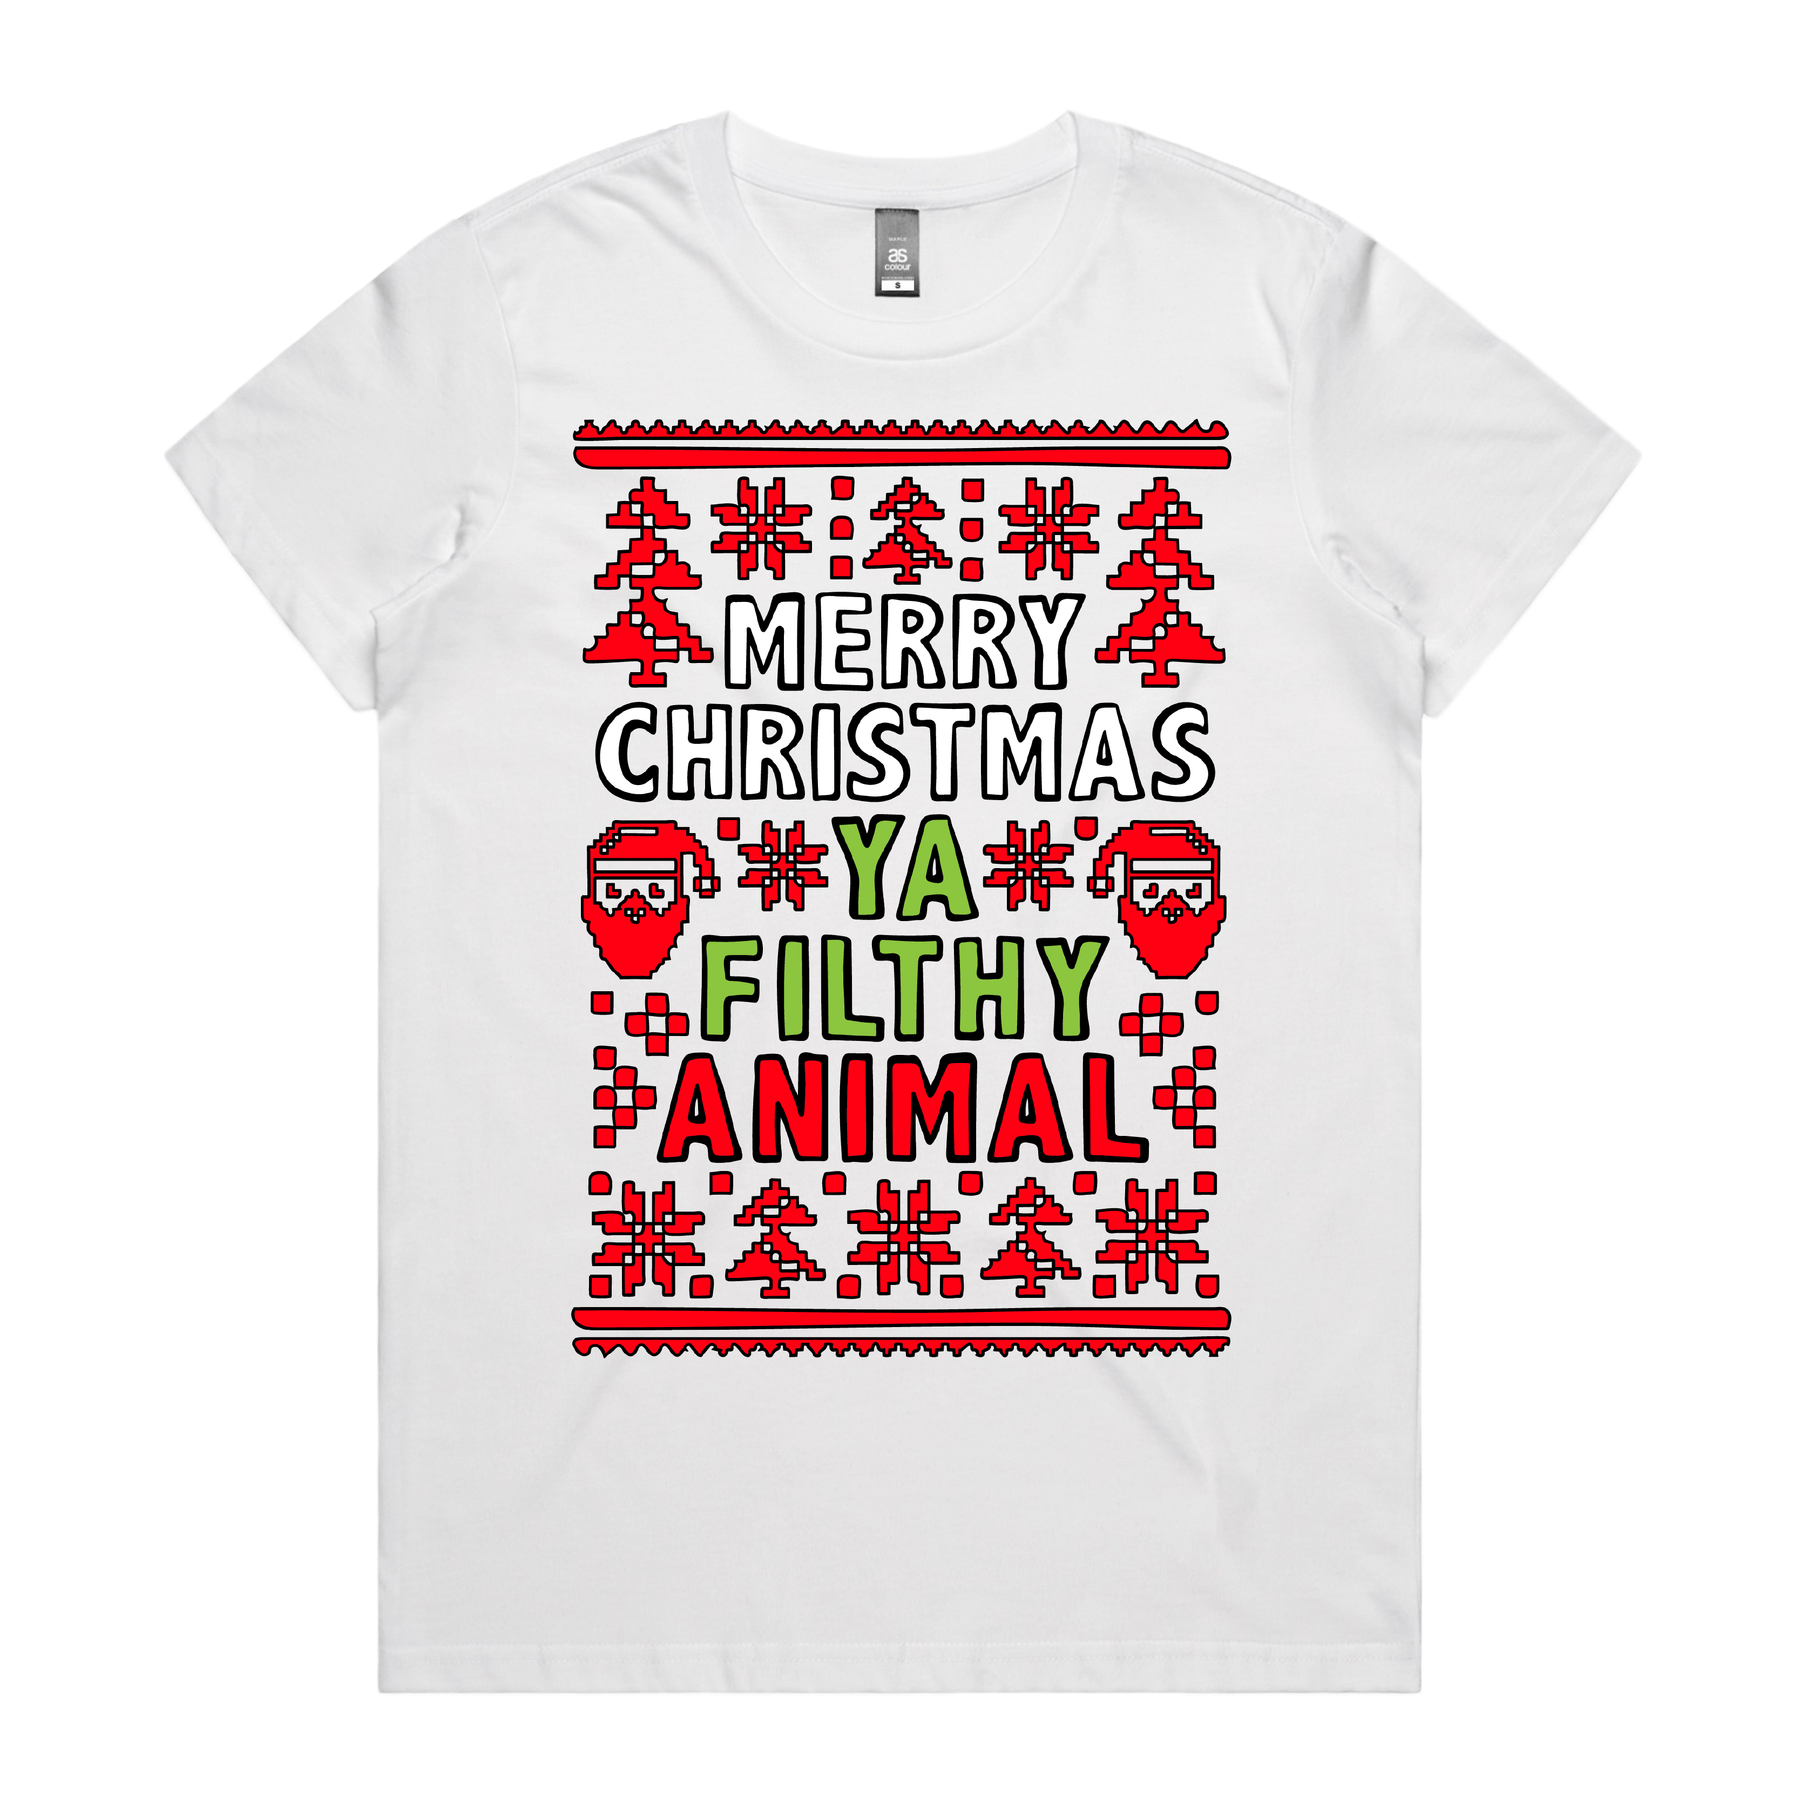 XS / White / Large Front Design Filthy Animal Christmas 🎅 – Women's T Shirt